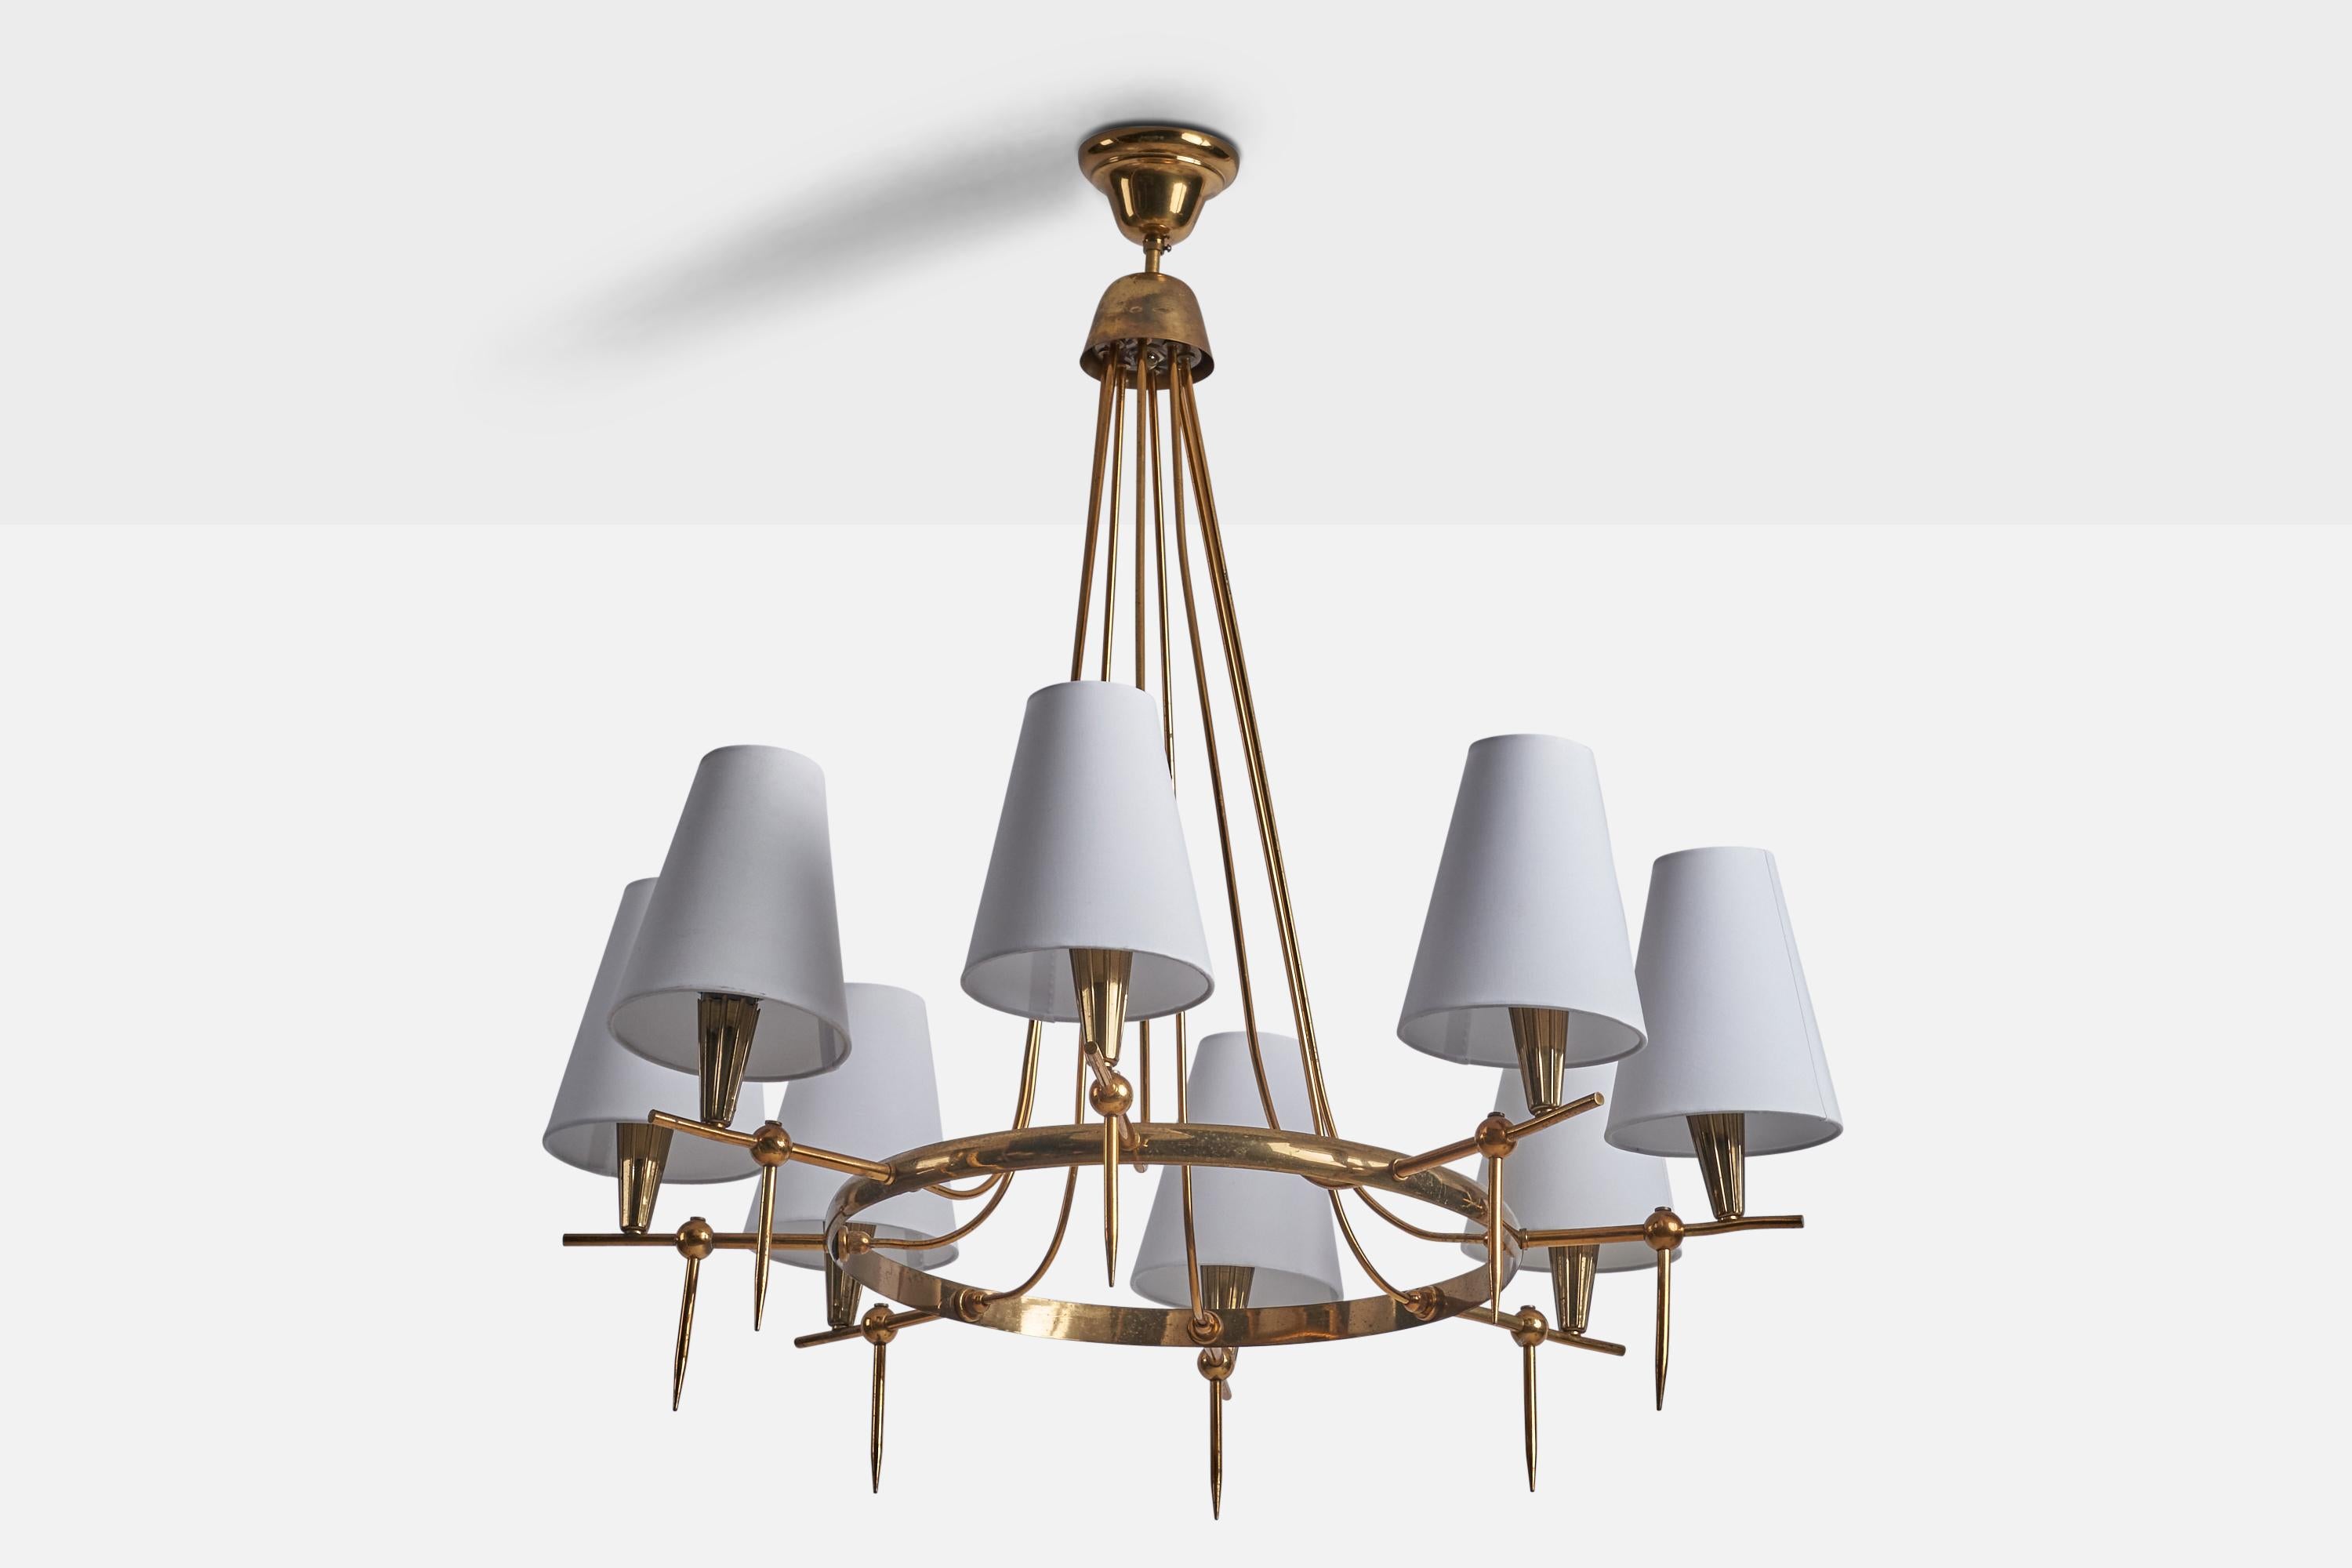 A brass and white fabric chandelier designed and produced in Italy, c. 1950s.

Overall Dimensions (inches): 32.5” H x 31” Diameter
Back Plate Dimensions (inches): 4” Diameter
Bulb Specifications: E-12 Bulb
Number of Sockets: 8
All lighting will be